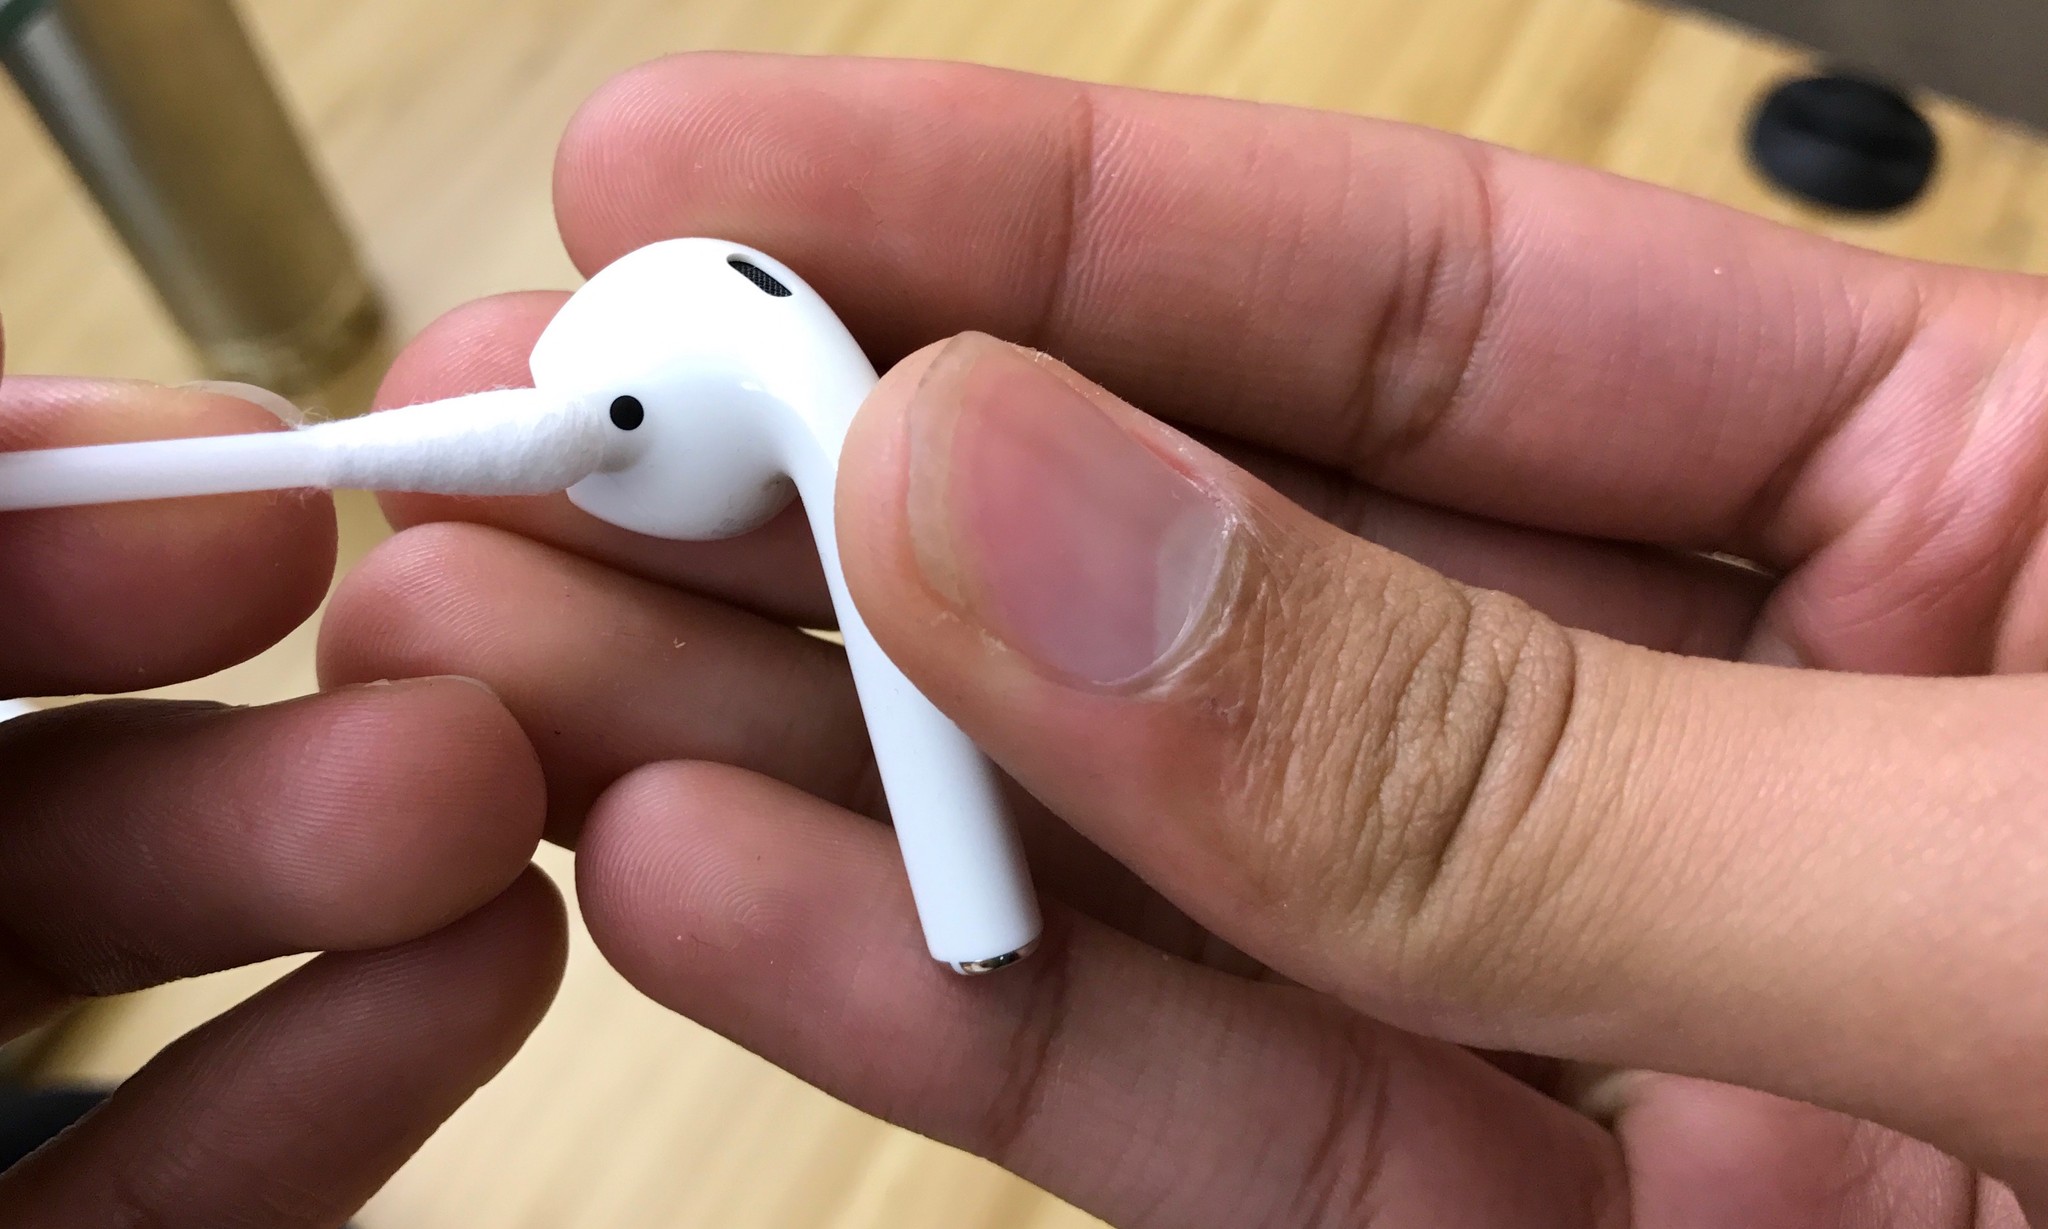 Using a cotton swab to do a thorough cleaning of AirPods